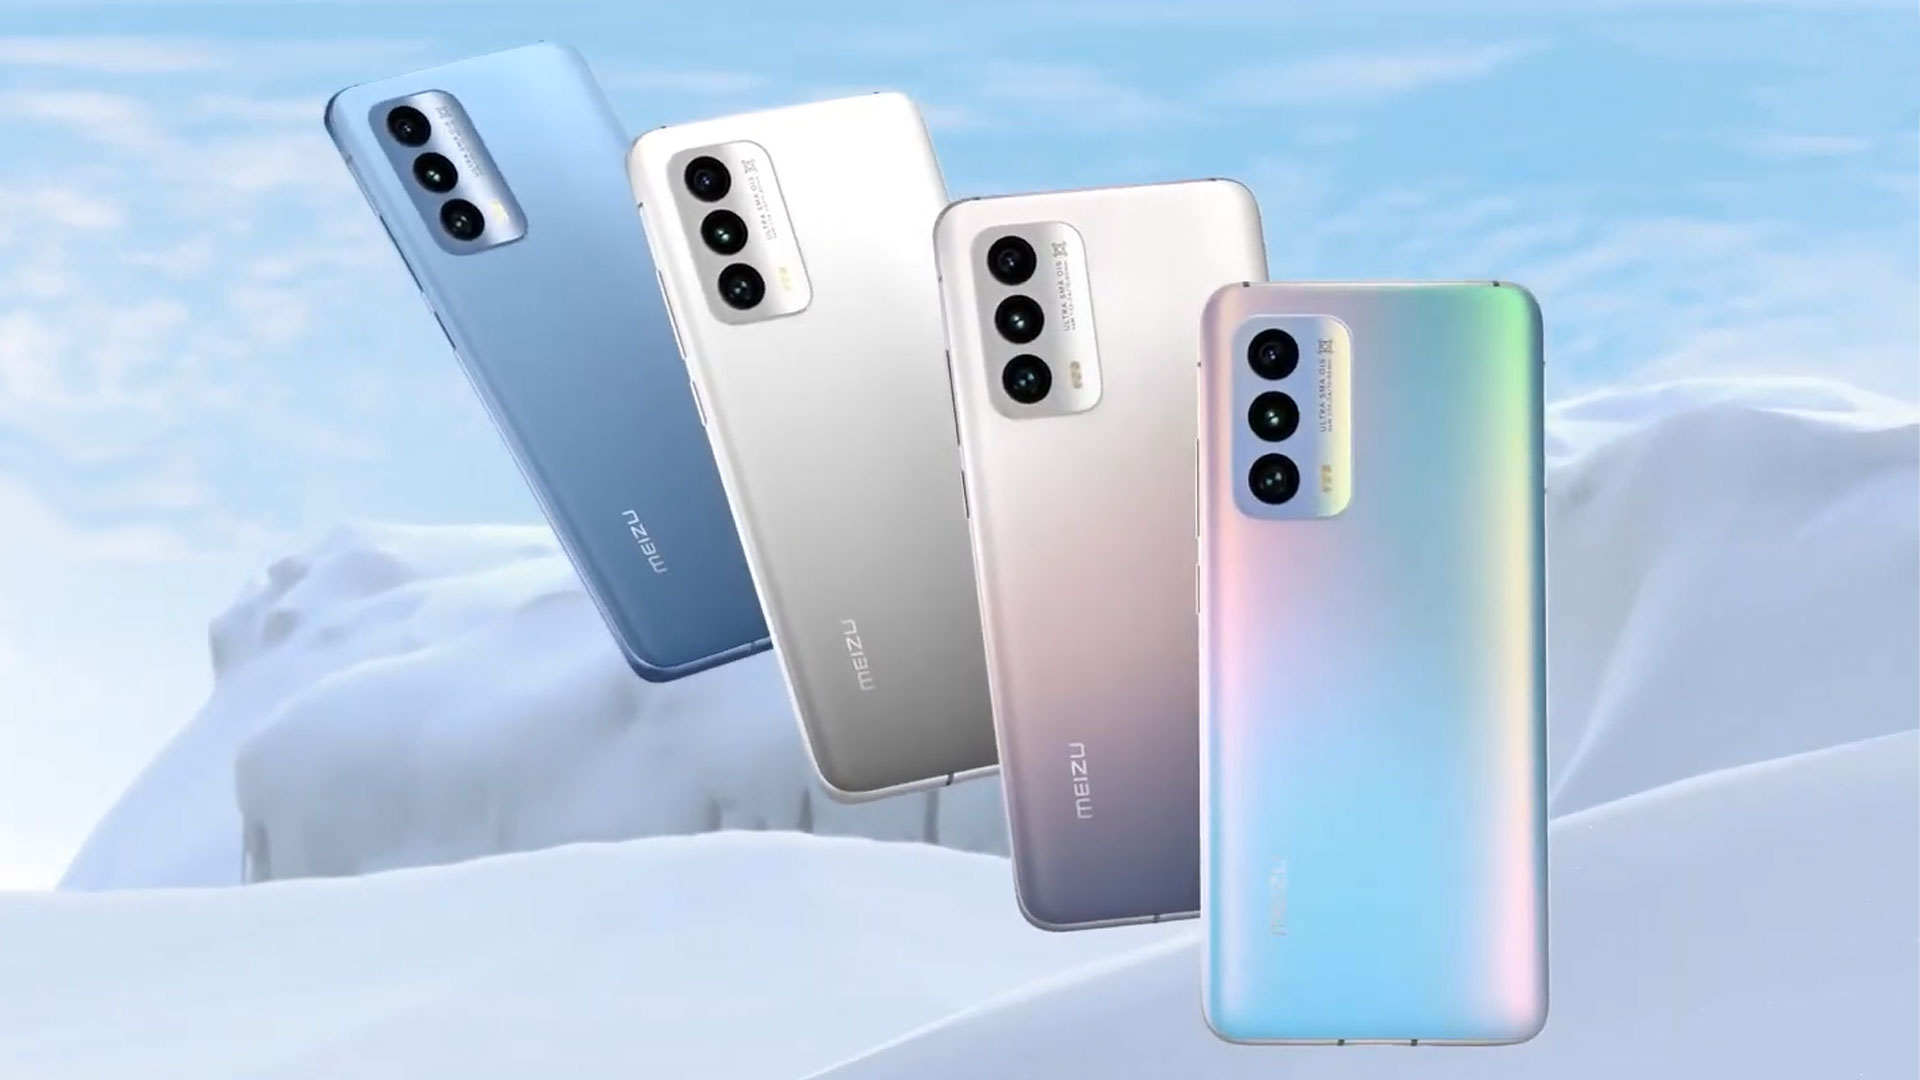 Meizu made a splash at the 11.11 sale - smartphones are selling like hotcakes